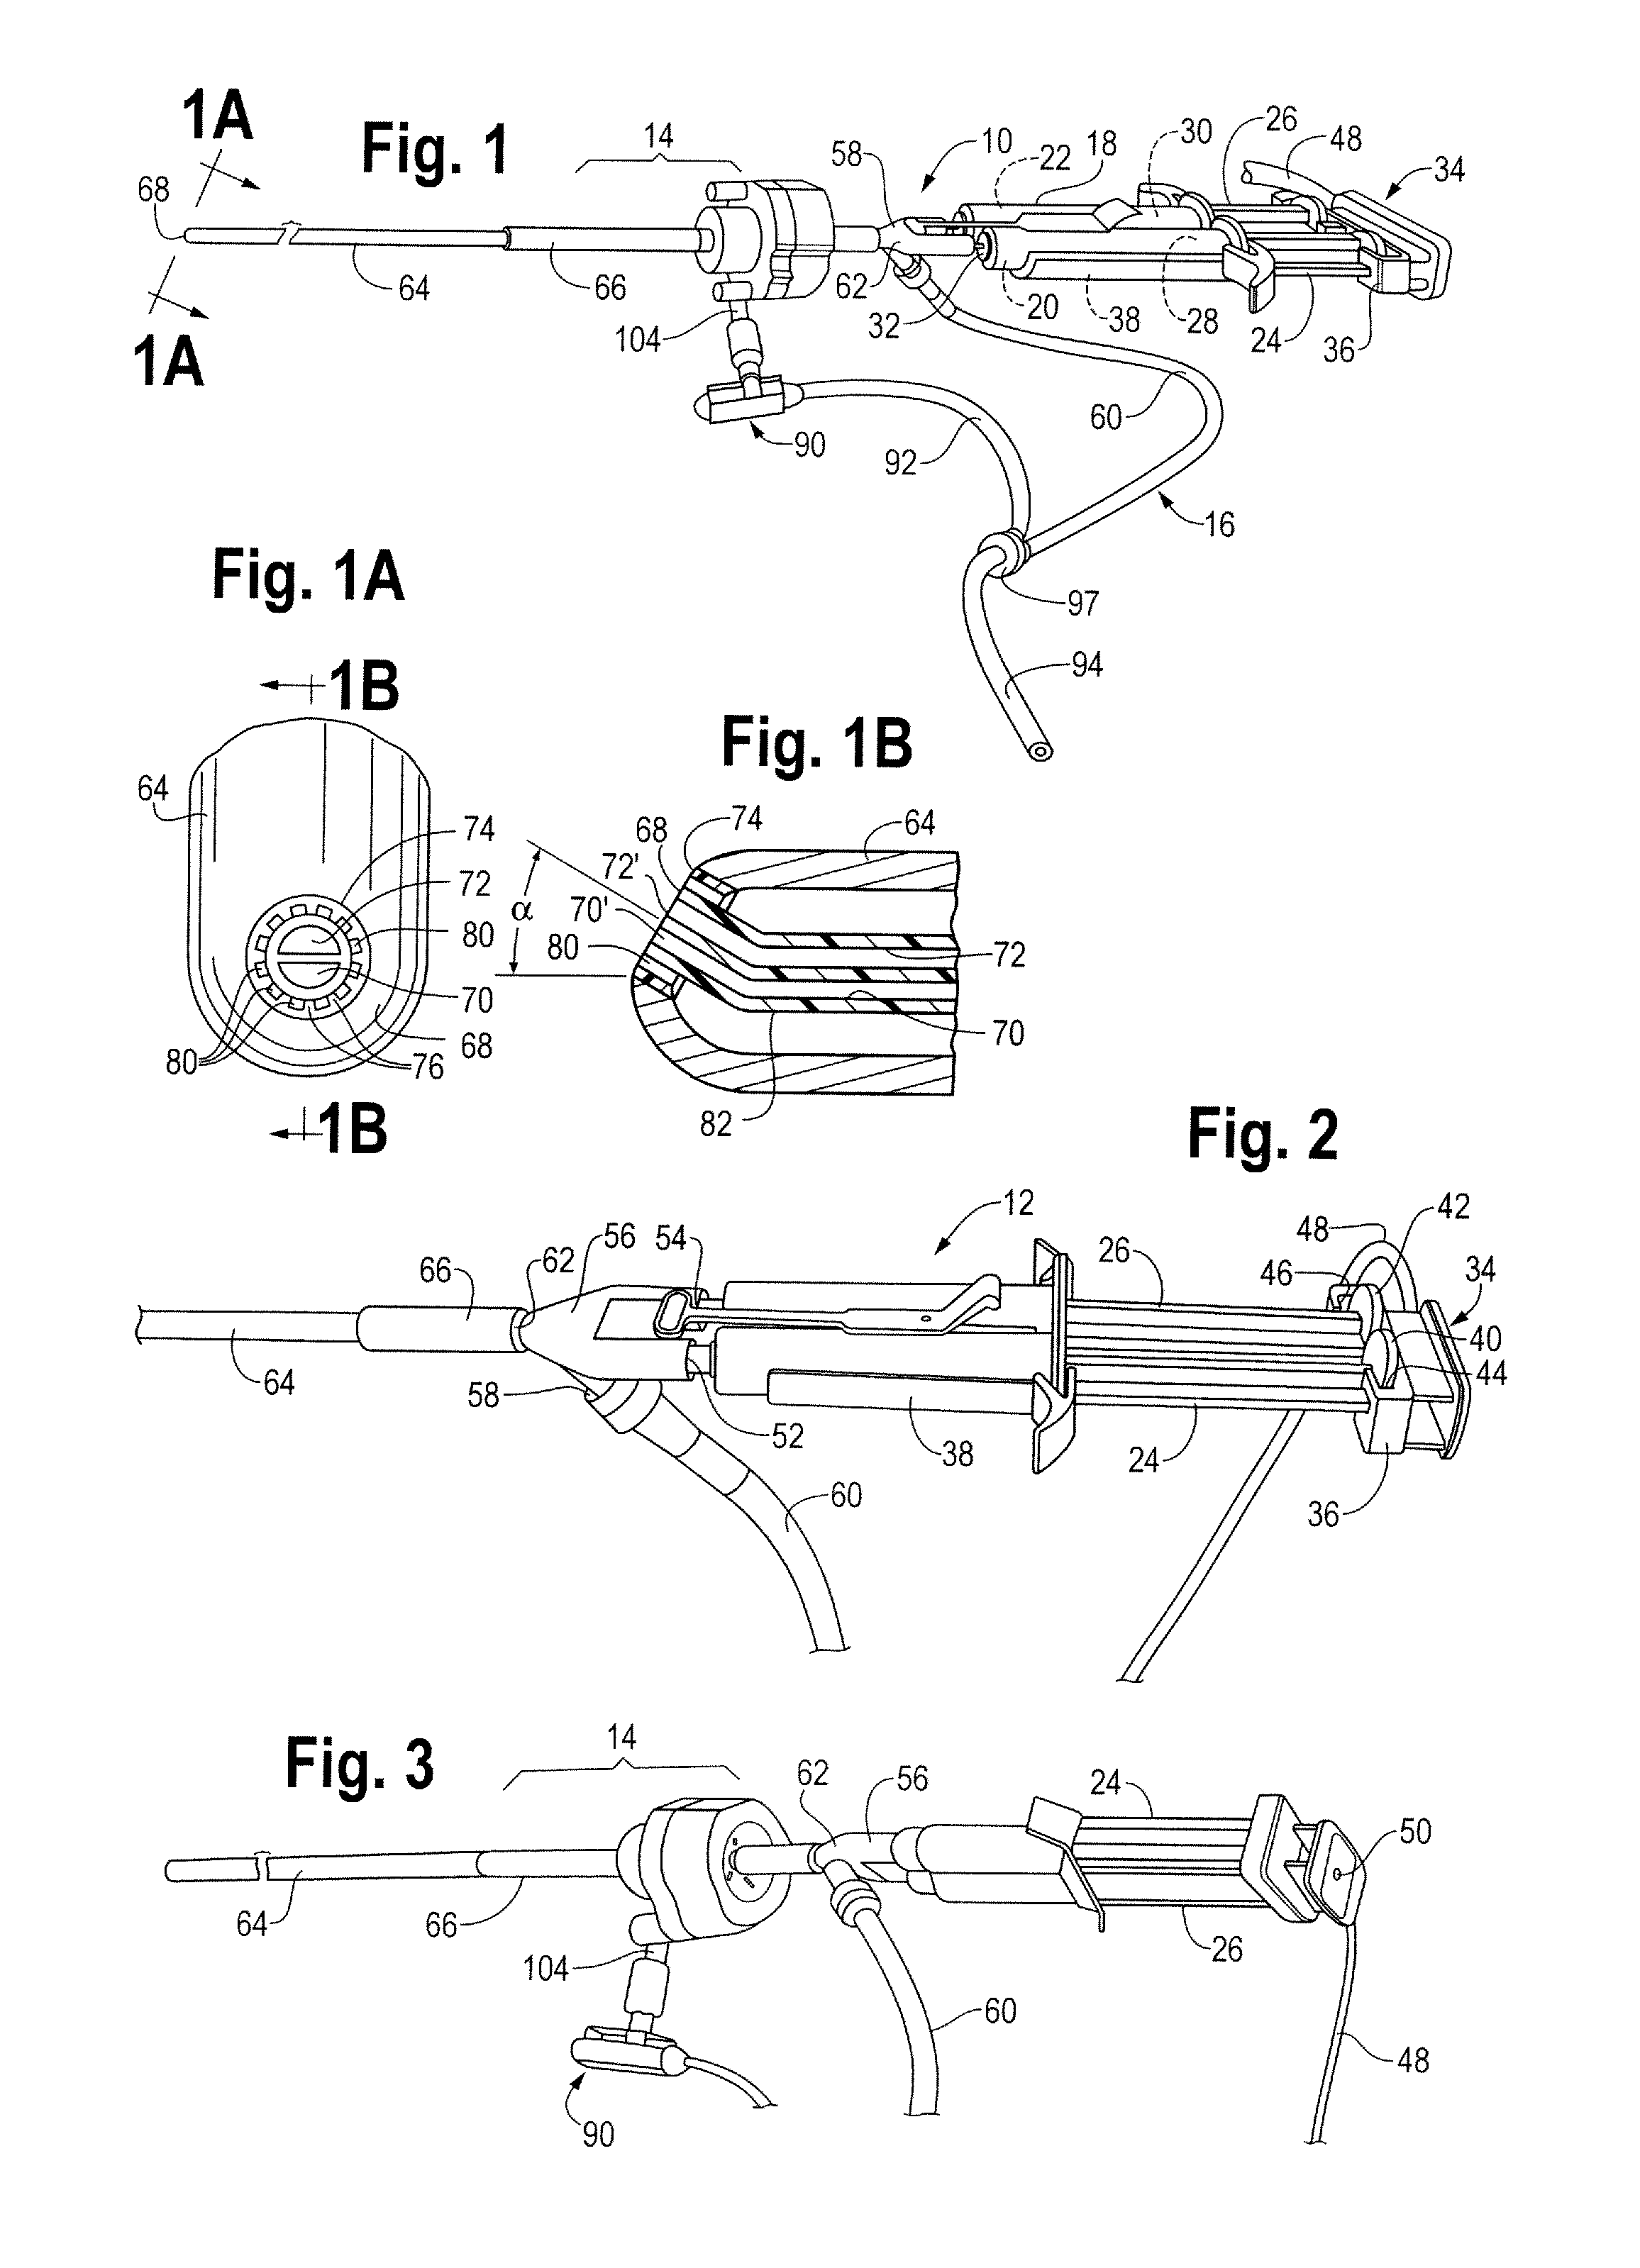 Tissue sealing system and apparatus